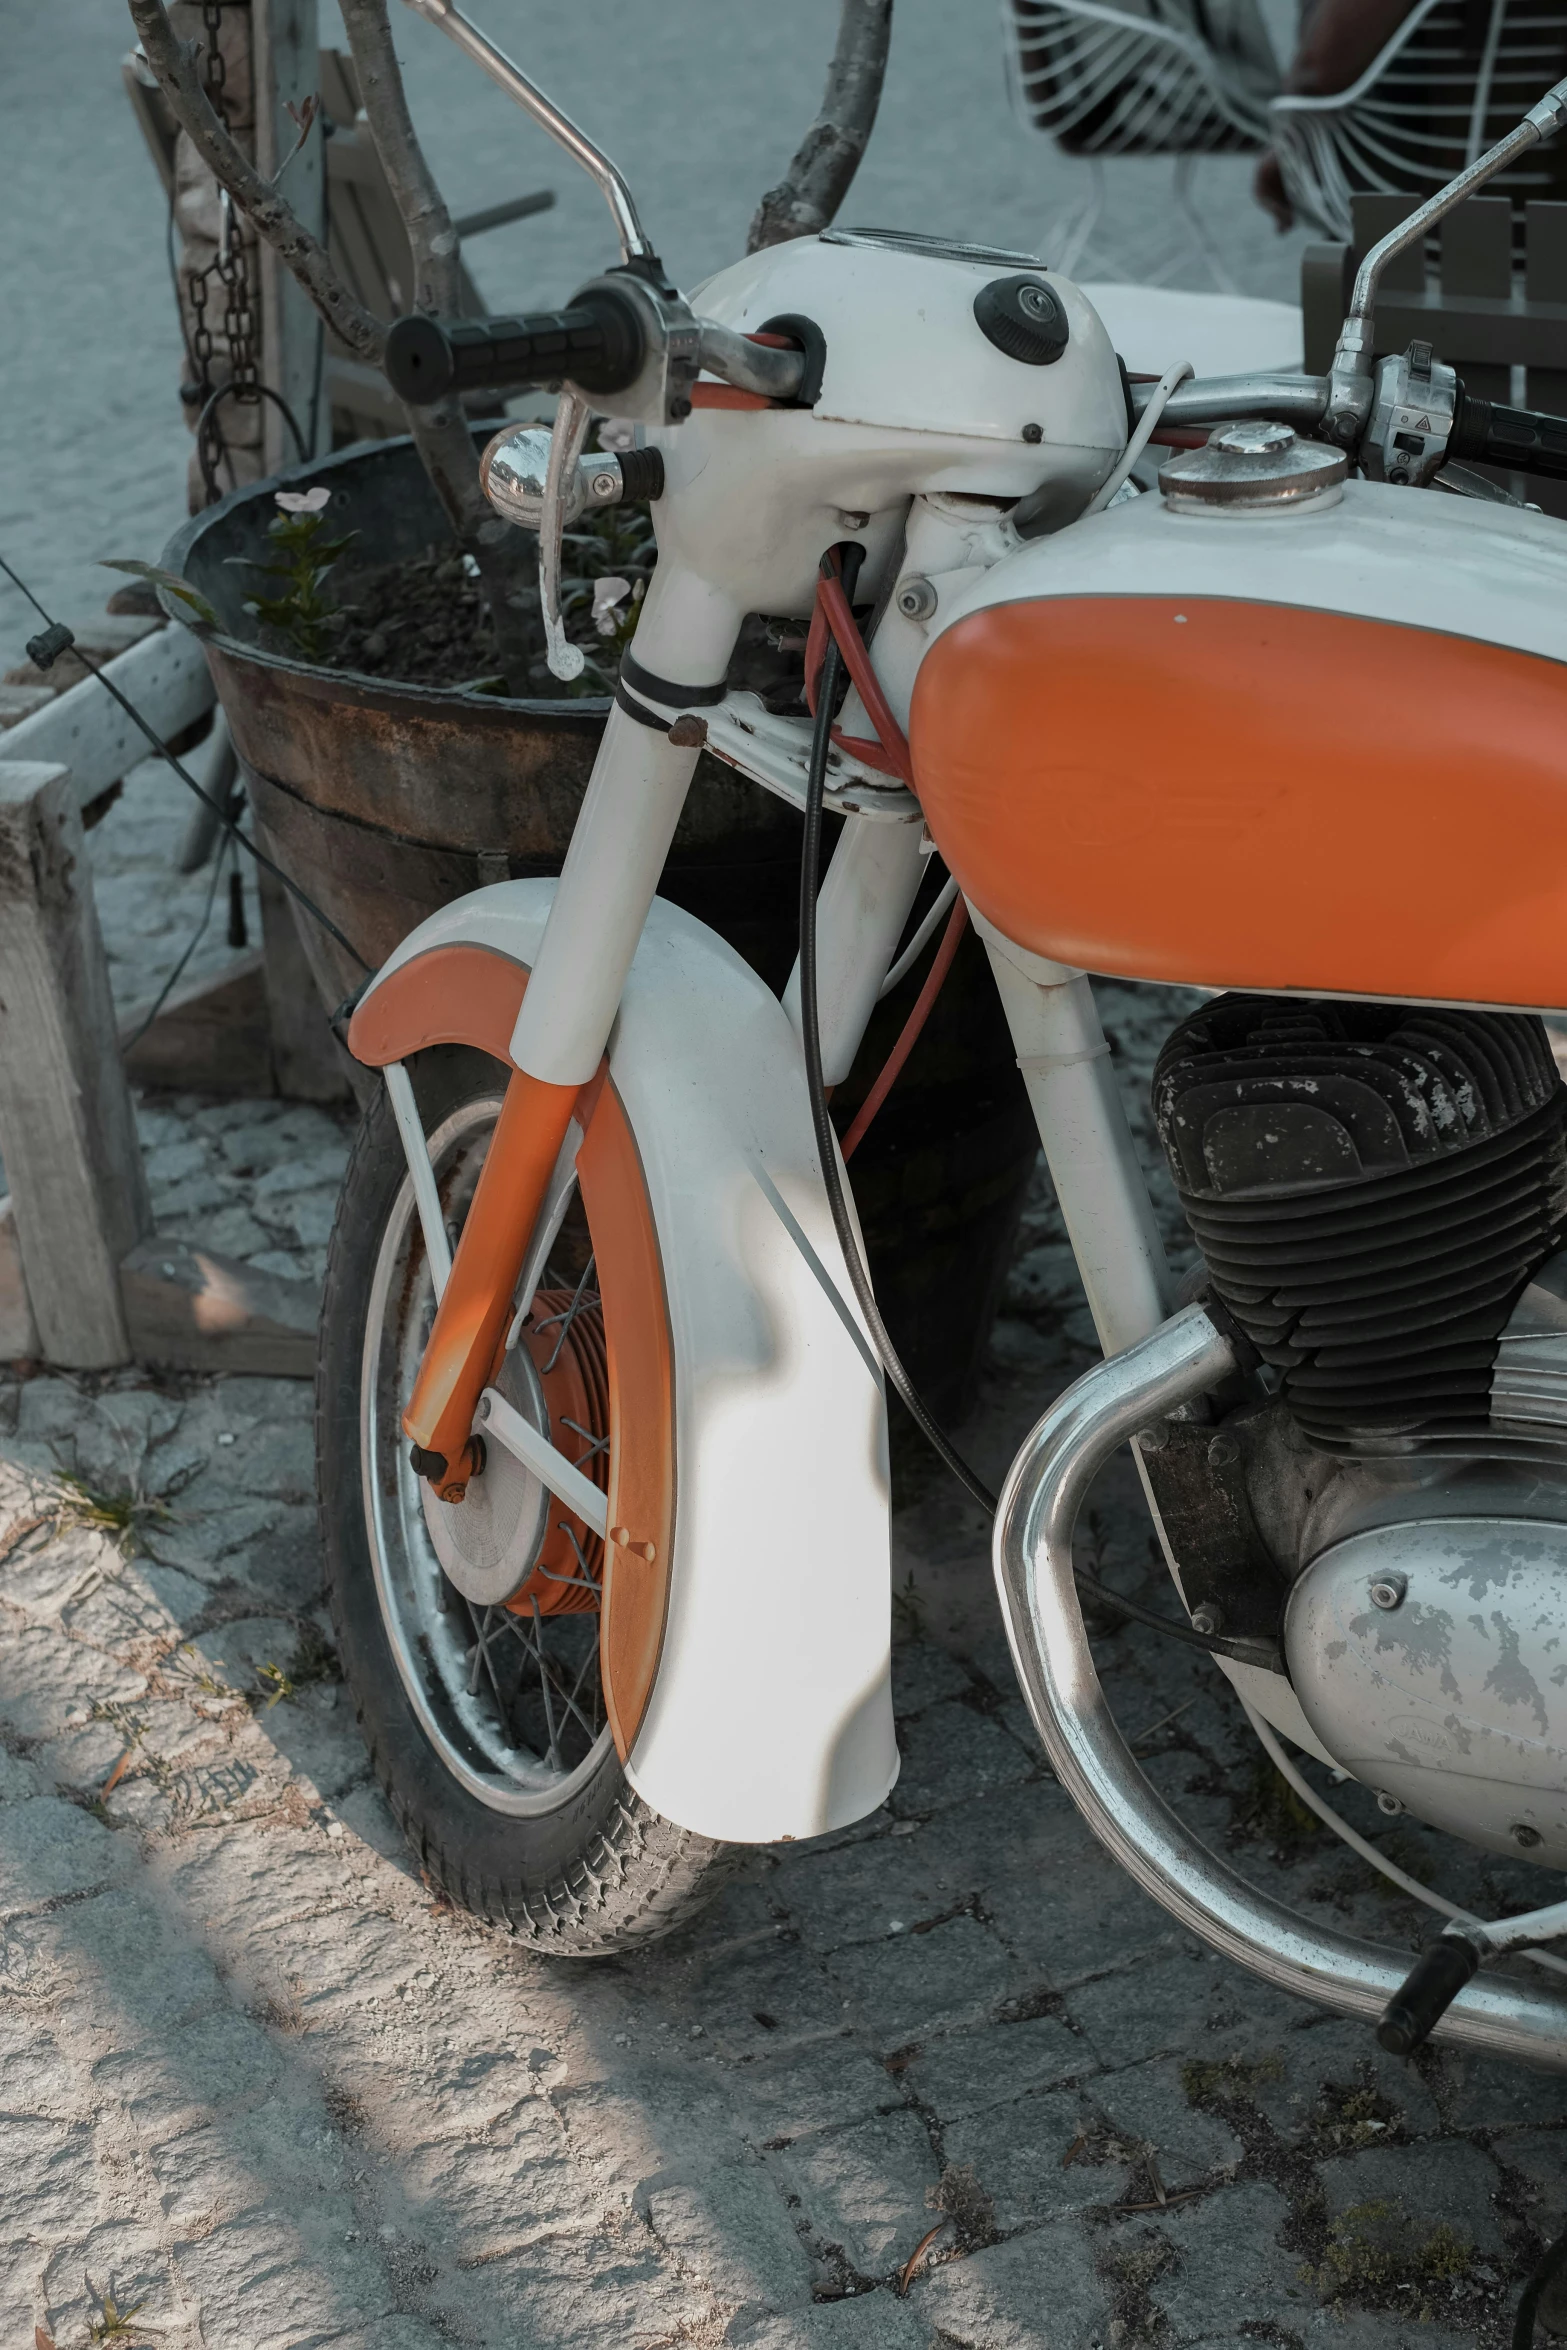 an old motorcycle that is painted in orange and white